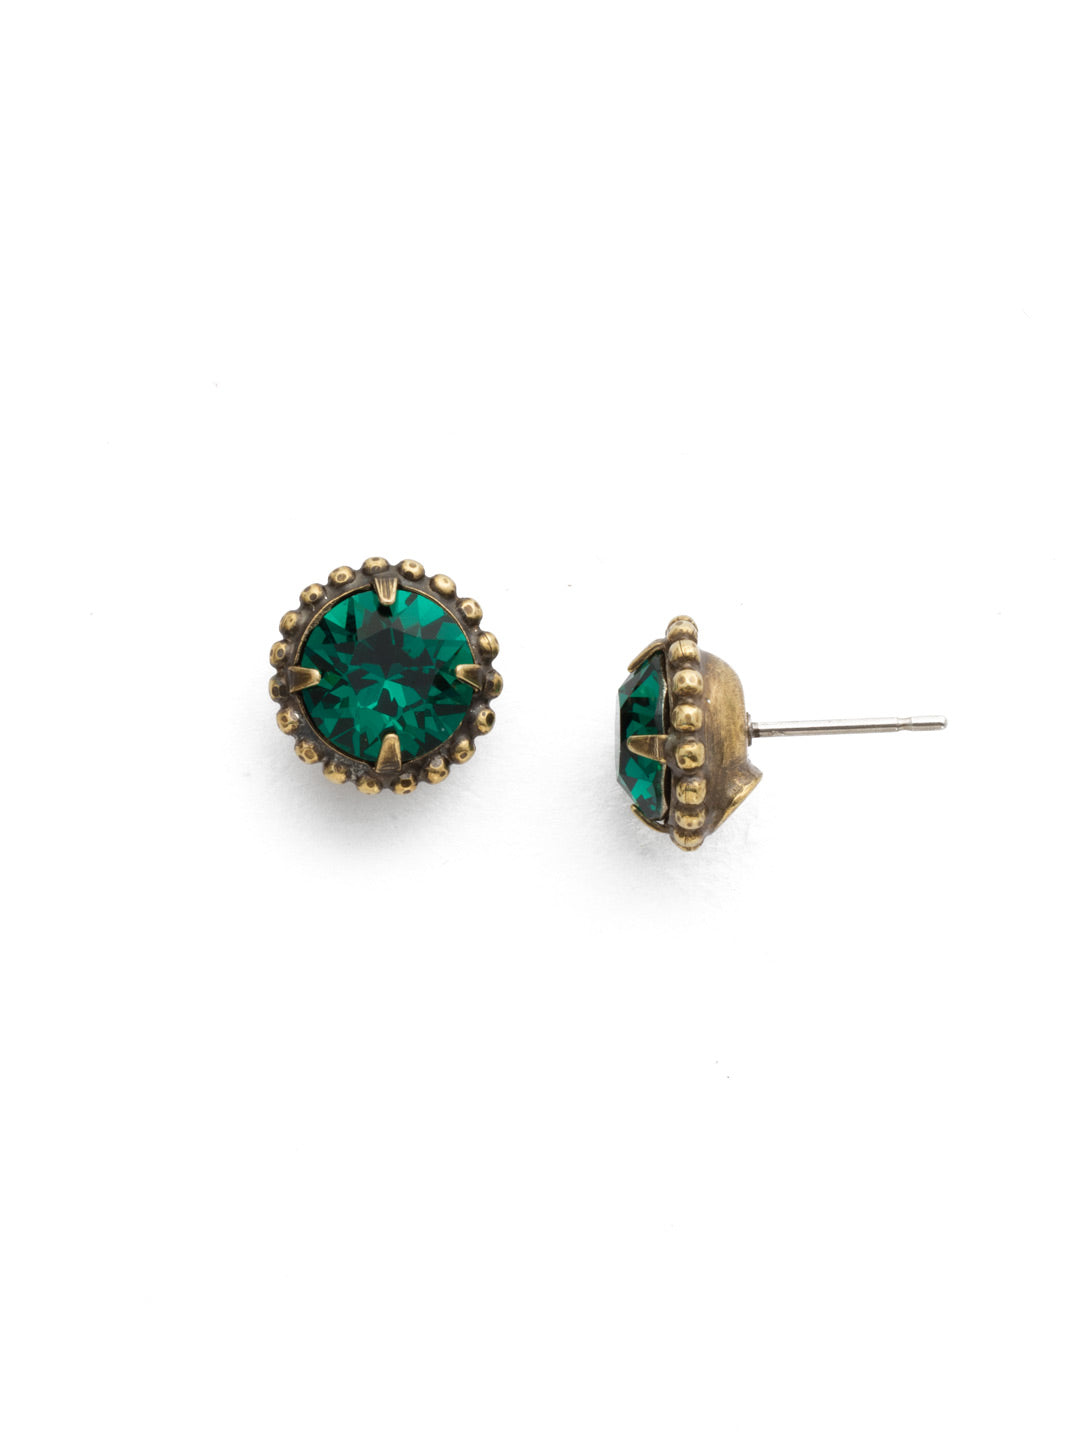 Simplicity Stud Earrings - EBY38AGEME - <p>A timeless classic, the Simplicity Stud Earrings feature round cut crystals in a variety of colors; accented with a halo of metal beaded detail. Need help picking a stud? <a href="https://www.sorrelli.com/blogs/sisterhood/round-stud-earrings-101-a-rundown-of-sizes-styles-and-sparkle">Check out our size guide!</a> From Sorrelli's Emerald collection in our Antique Gold-tone finish.</p>